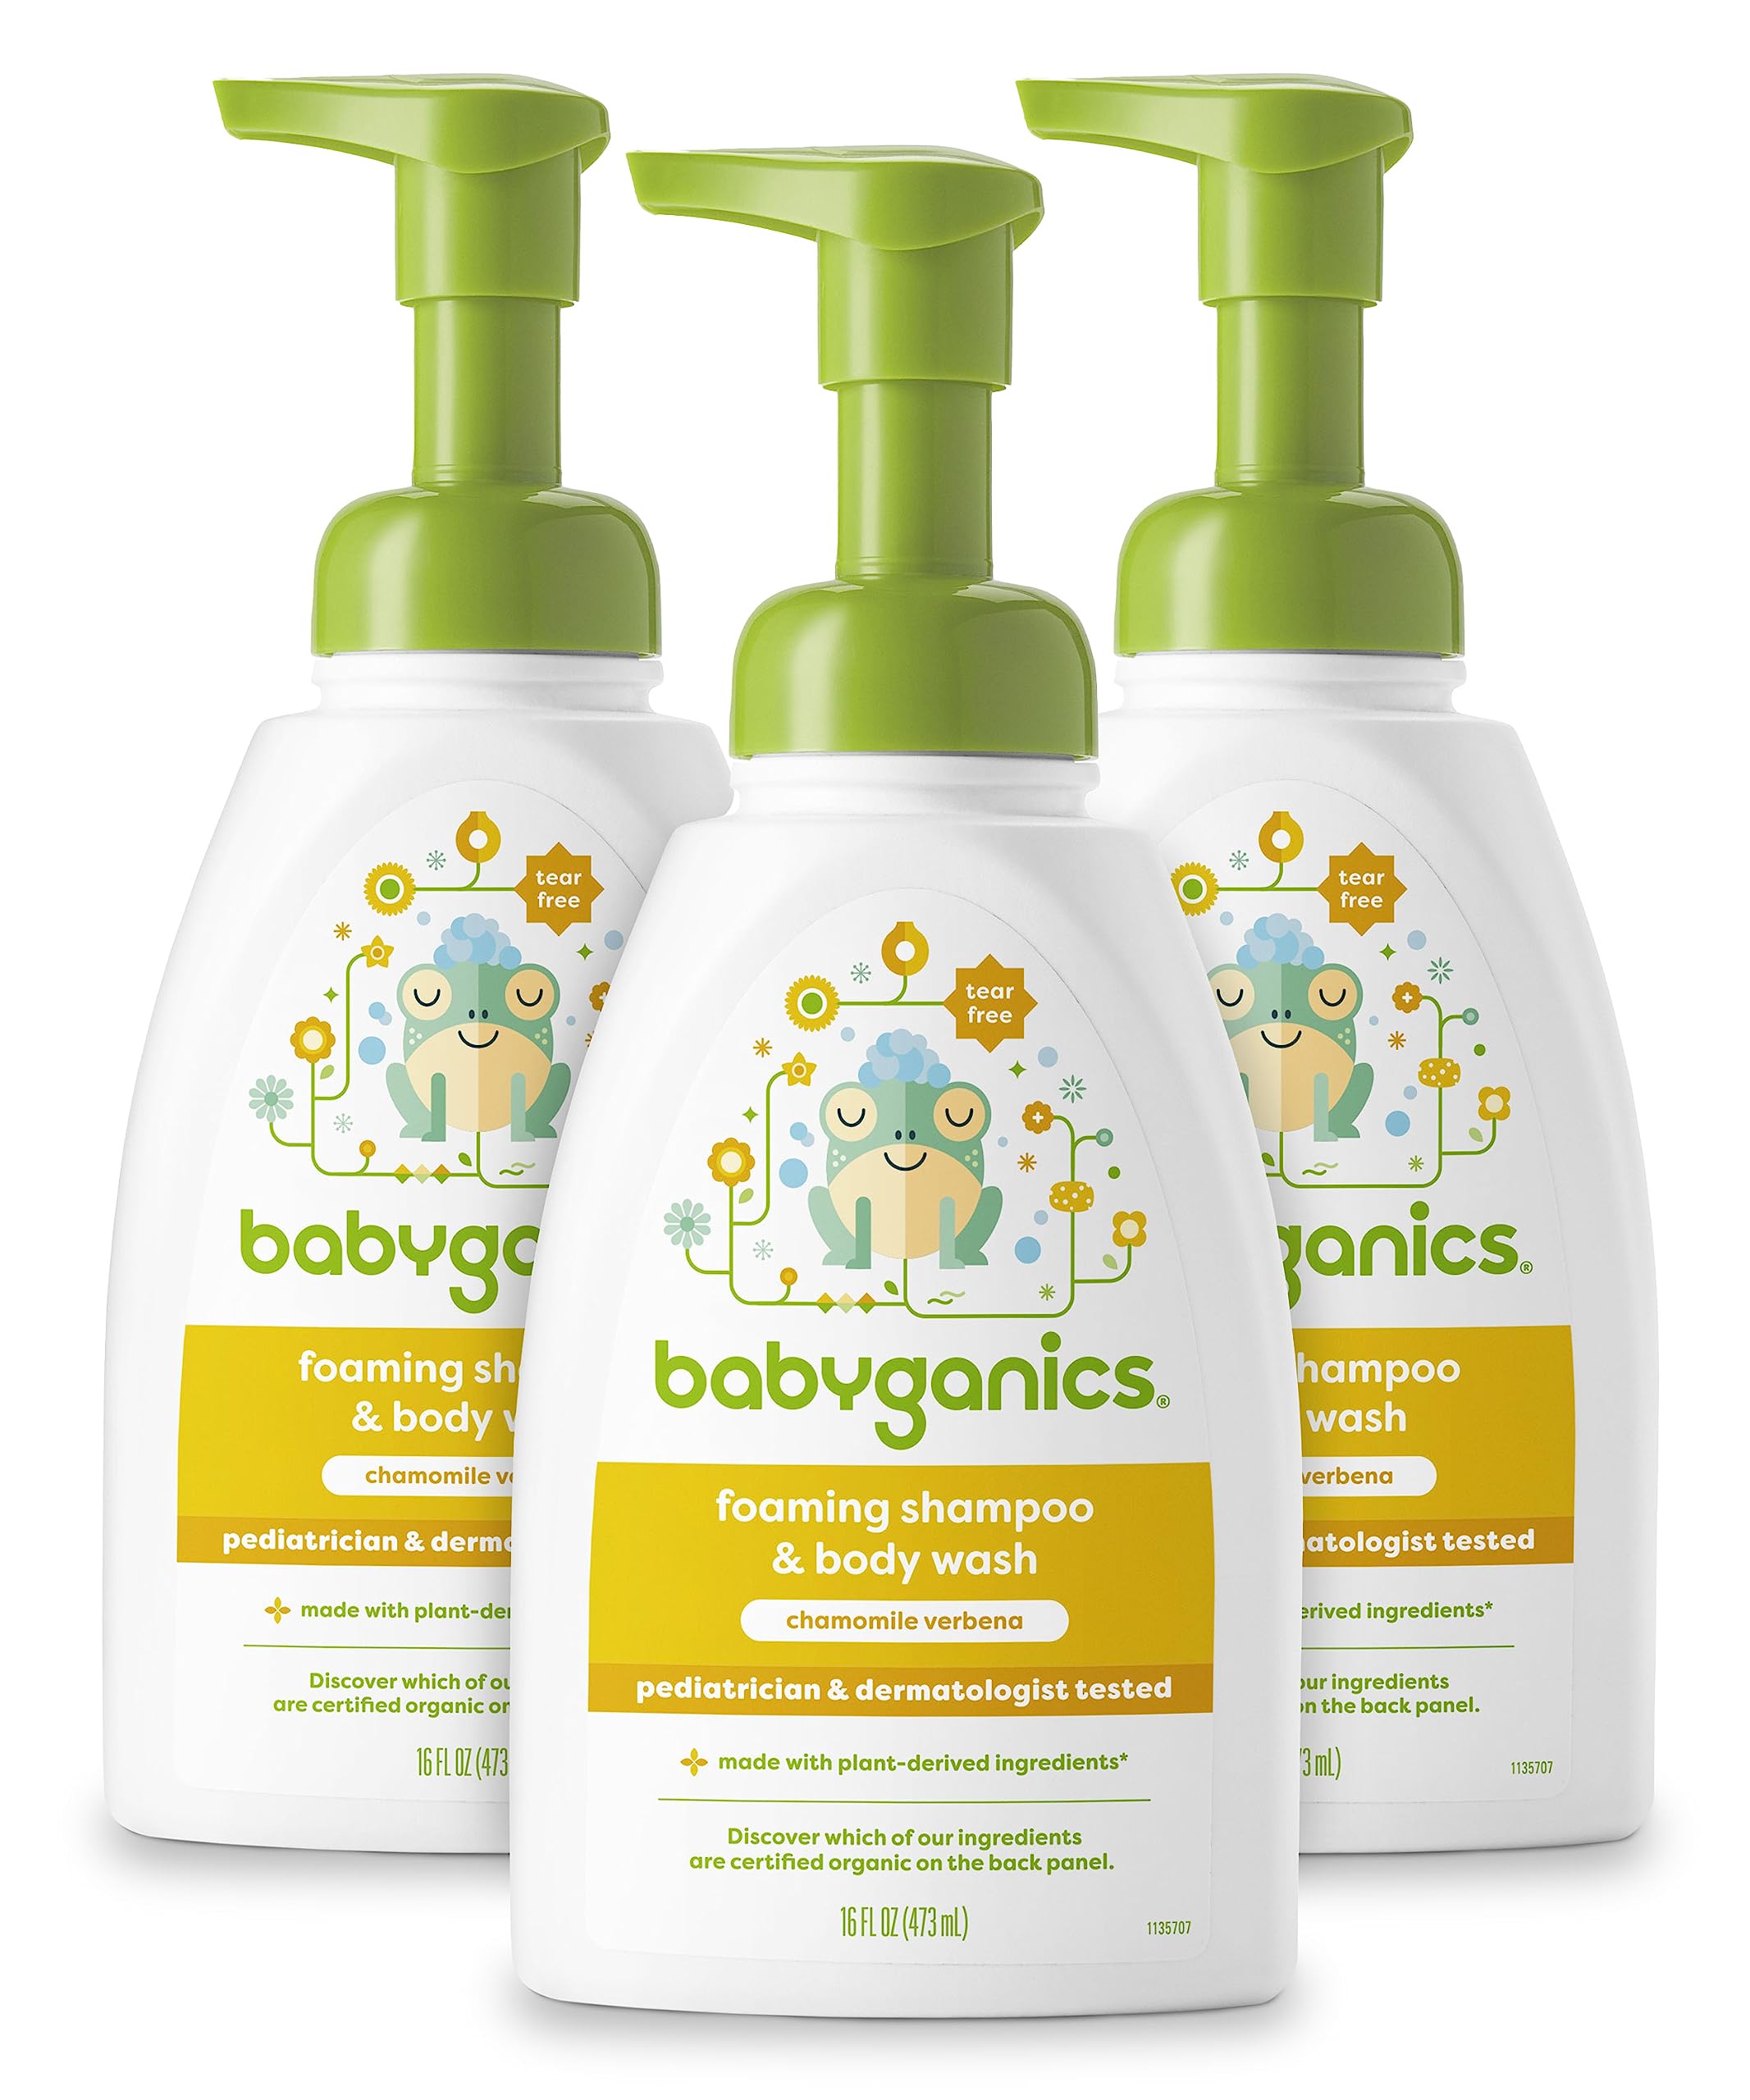 Babyganics Baby Shampoo + Body Wash Pump Bottle, Chamomile Verbena, Non-Allergenic and Tear-Free, 16 Fl Oz (Pack of 3), Packaging May Vary